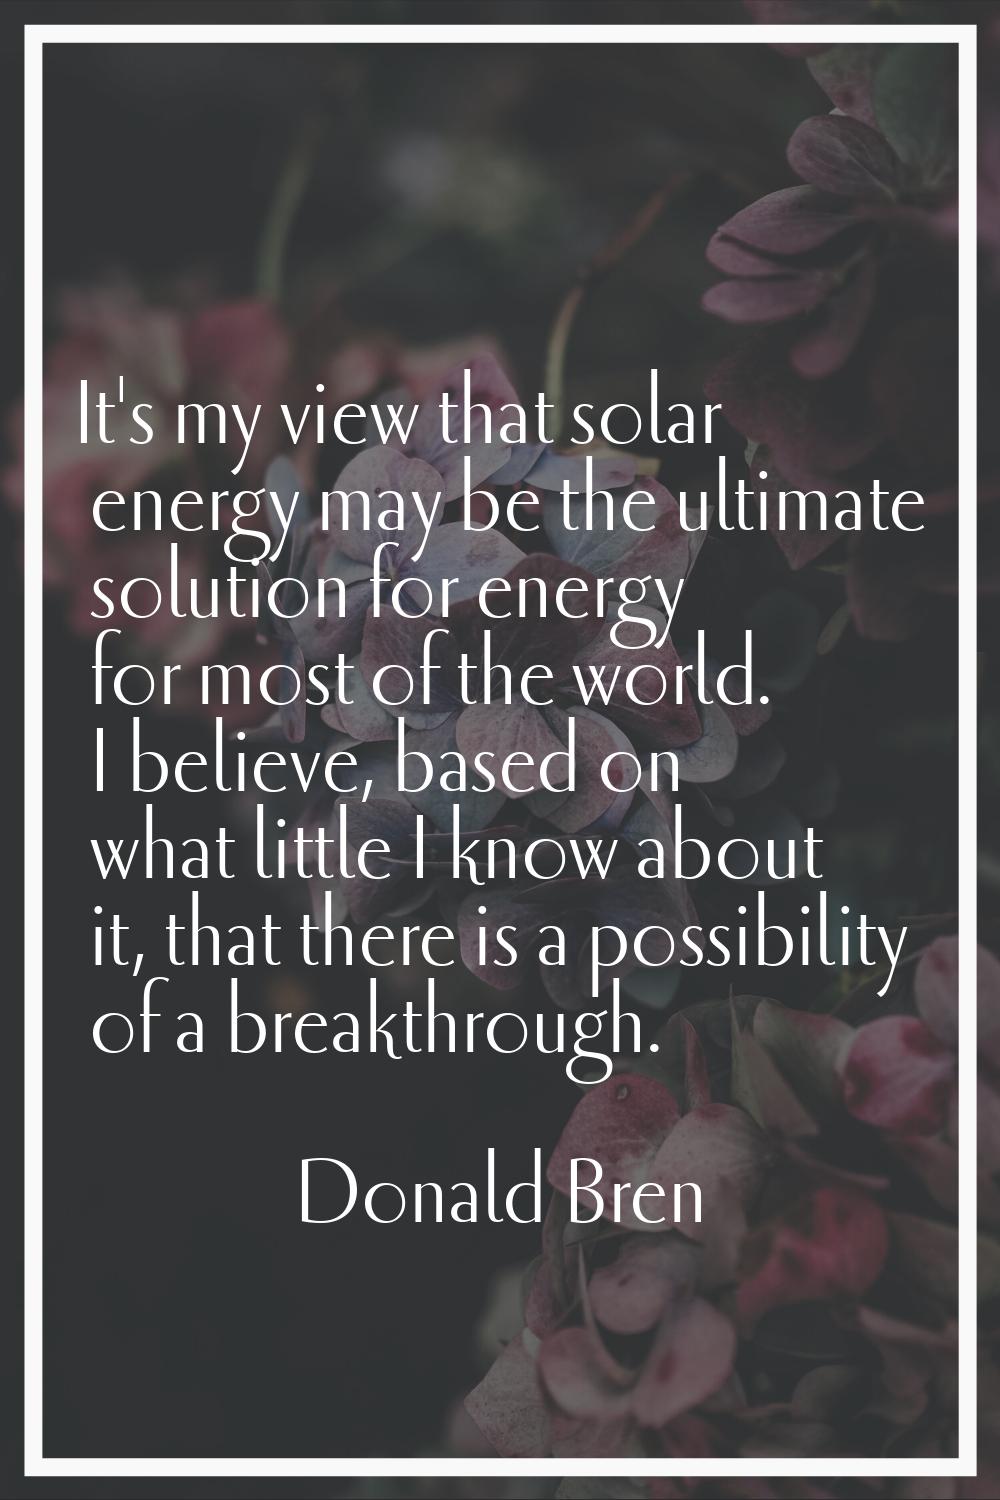 It's my view that solar energy may be the ultimate solution for energy for most of the world. I bel